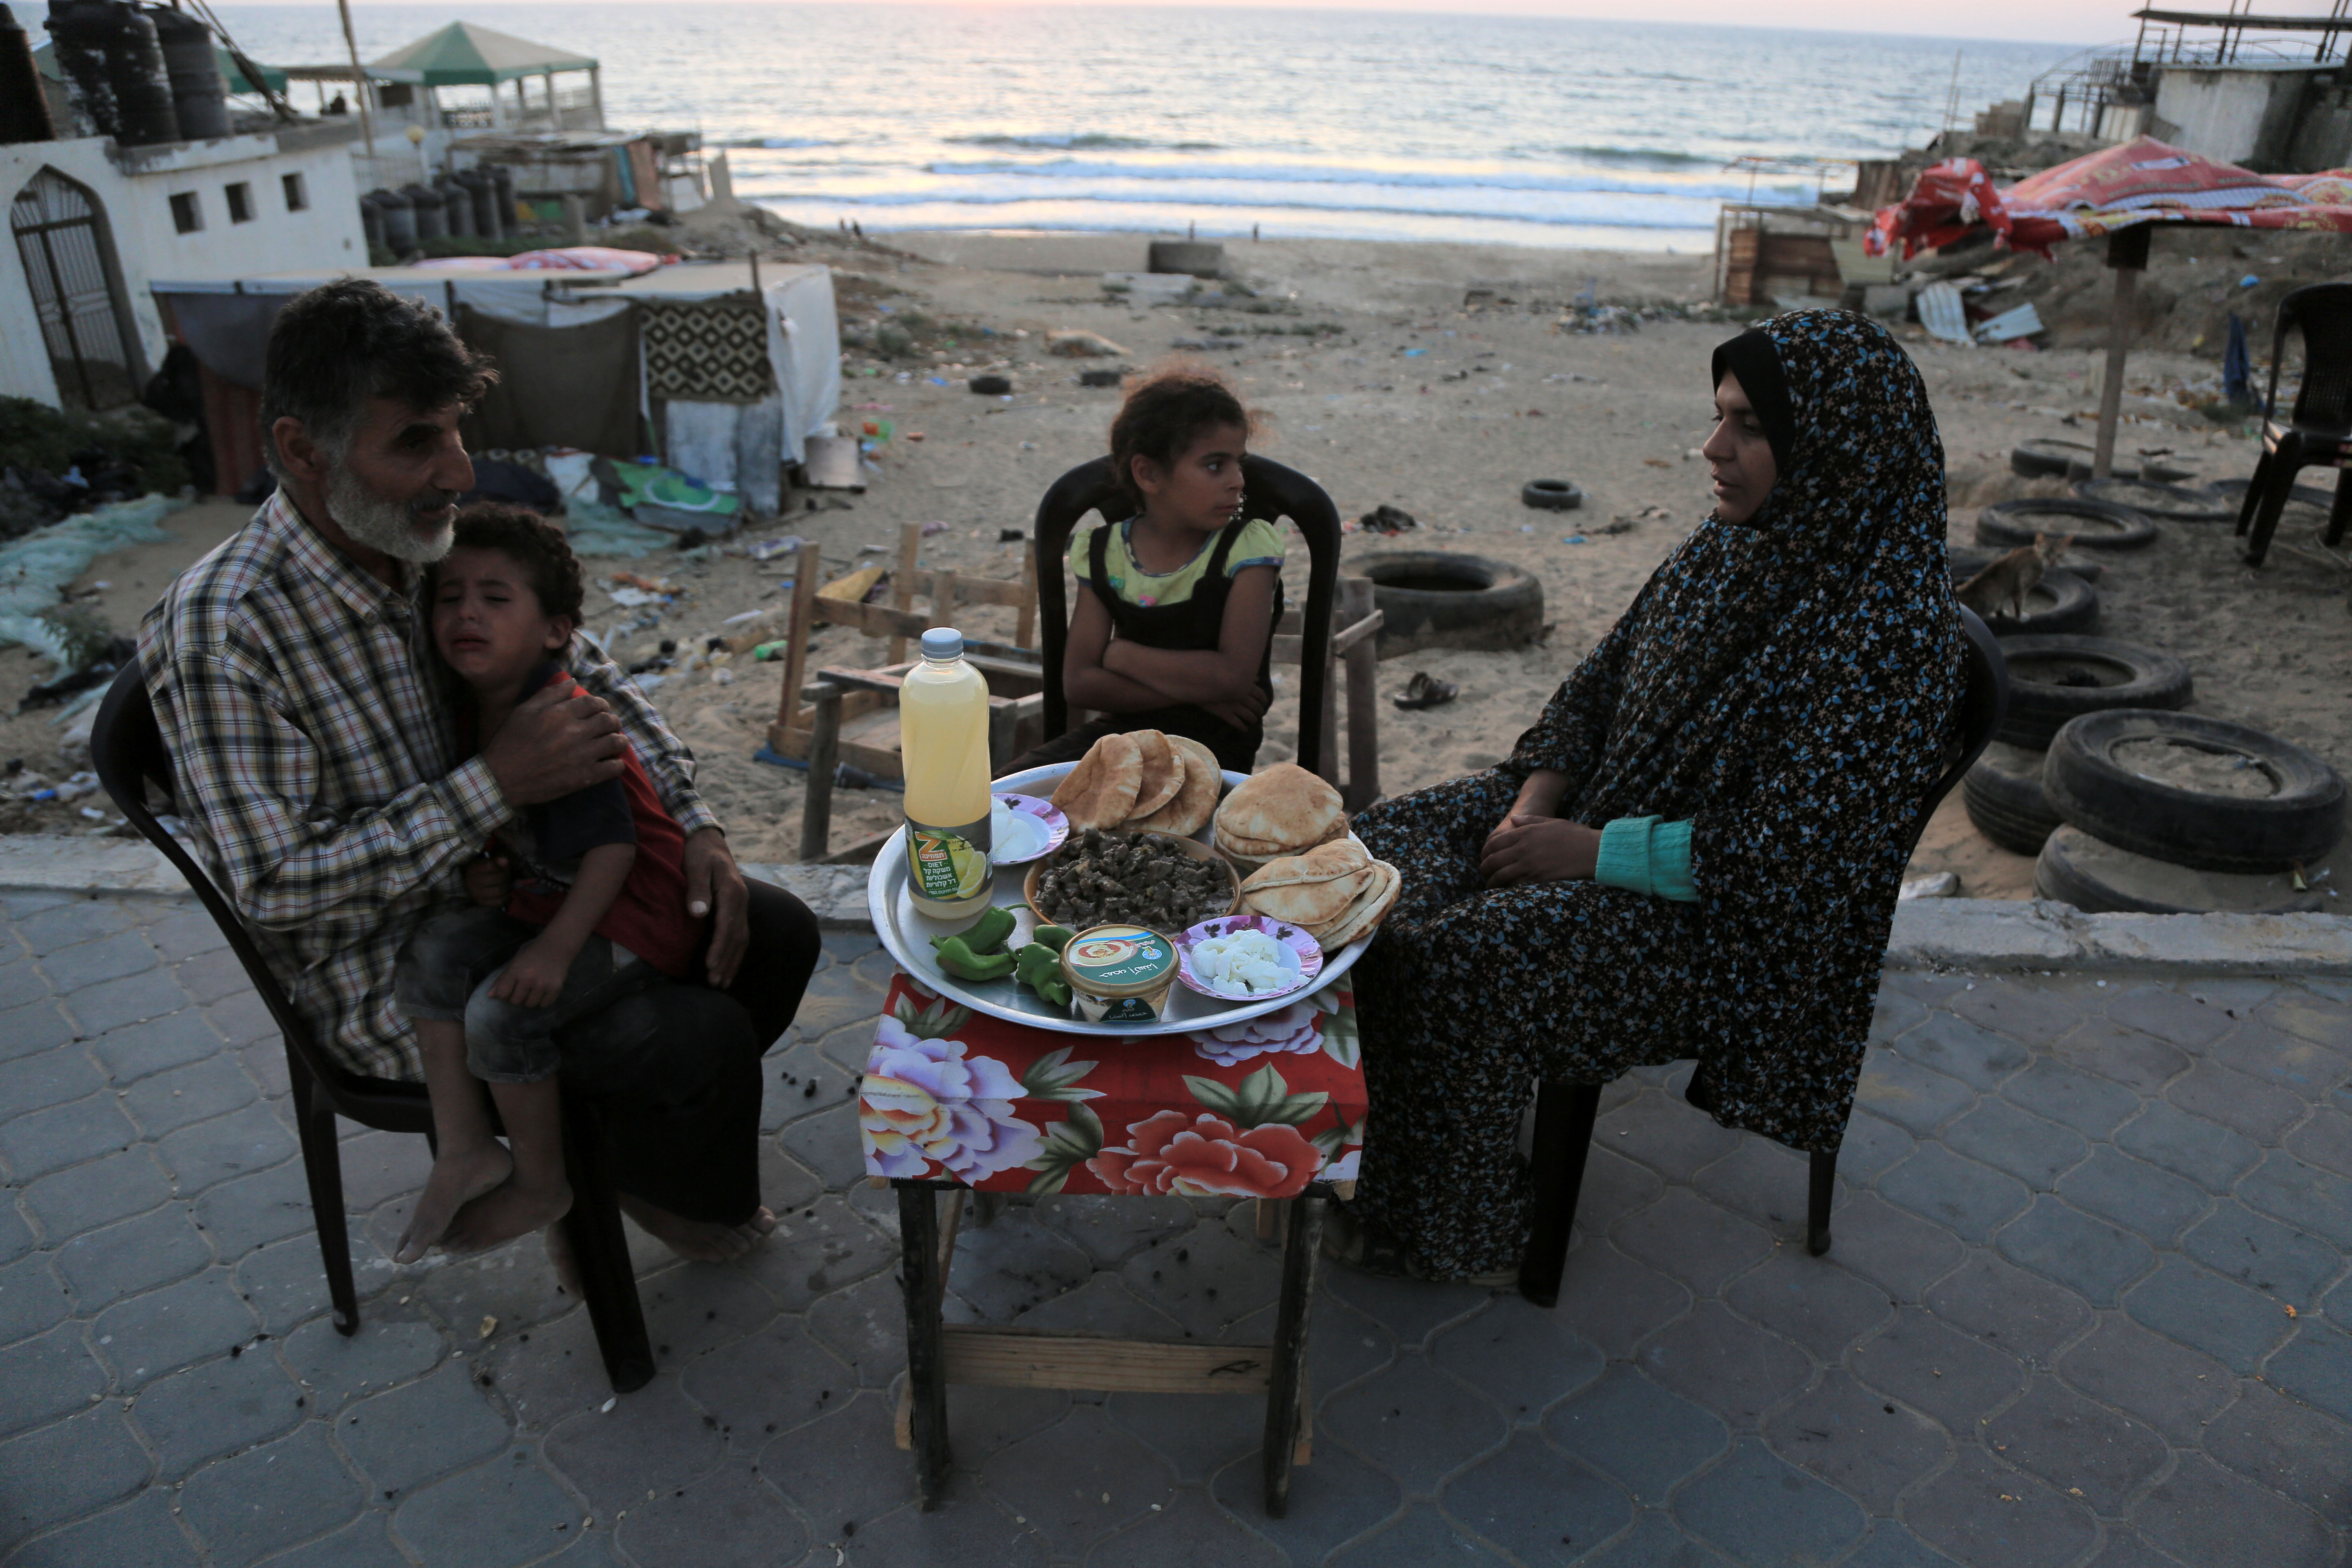 The al-Lahham family gathers for iftar (the meal that breaks the daily Ramadan fast) on the beach front sidewalk outside the tent where they live. The daily iftar ritual helps the family to preserve some sense of normalcy.